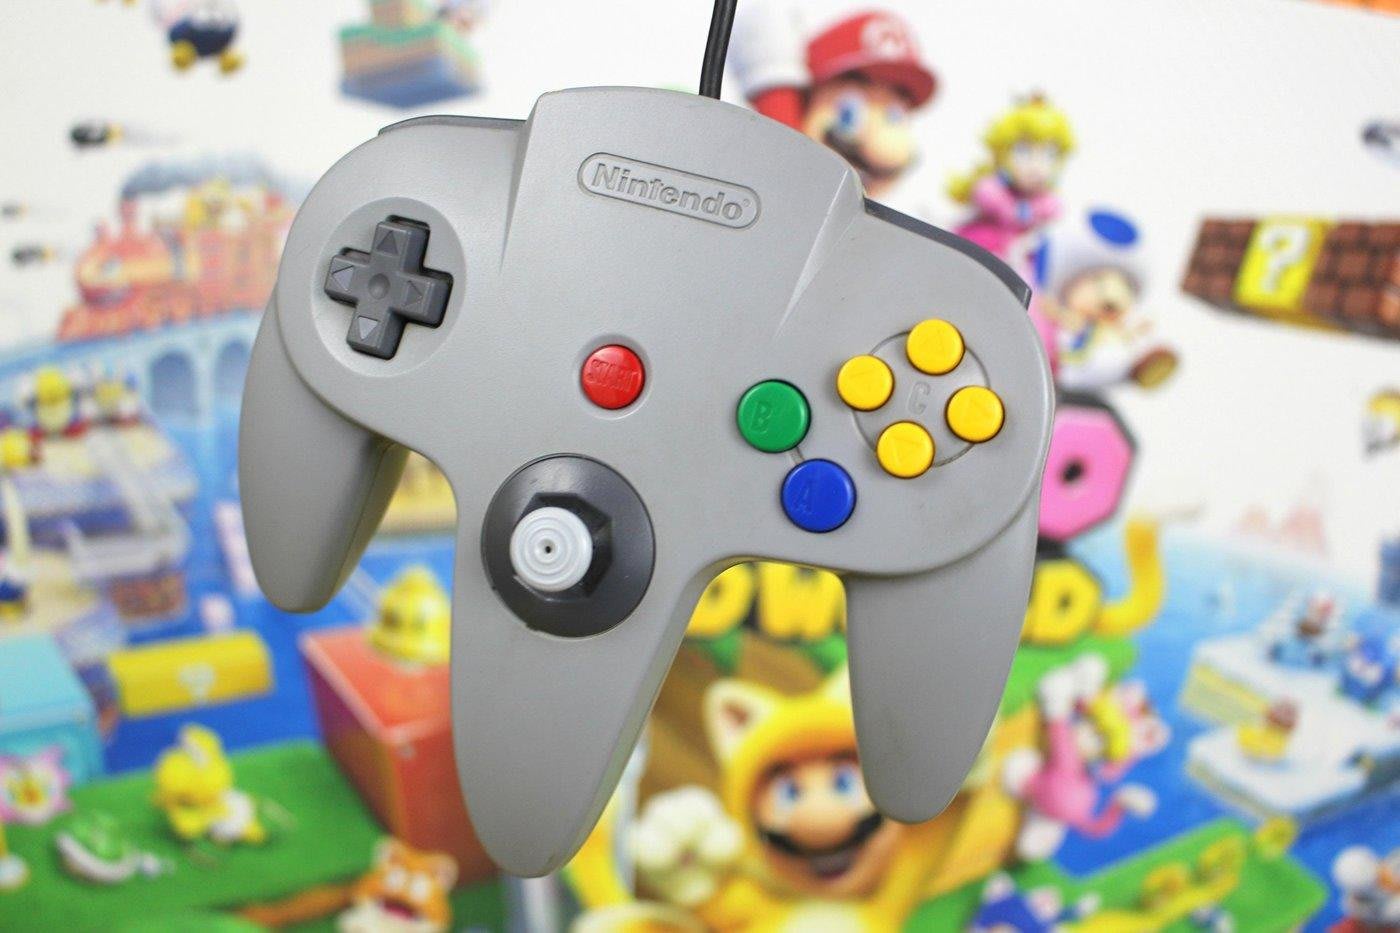 Best N64 games: 10 classics you need to play